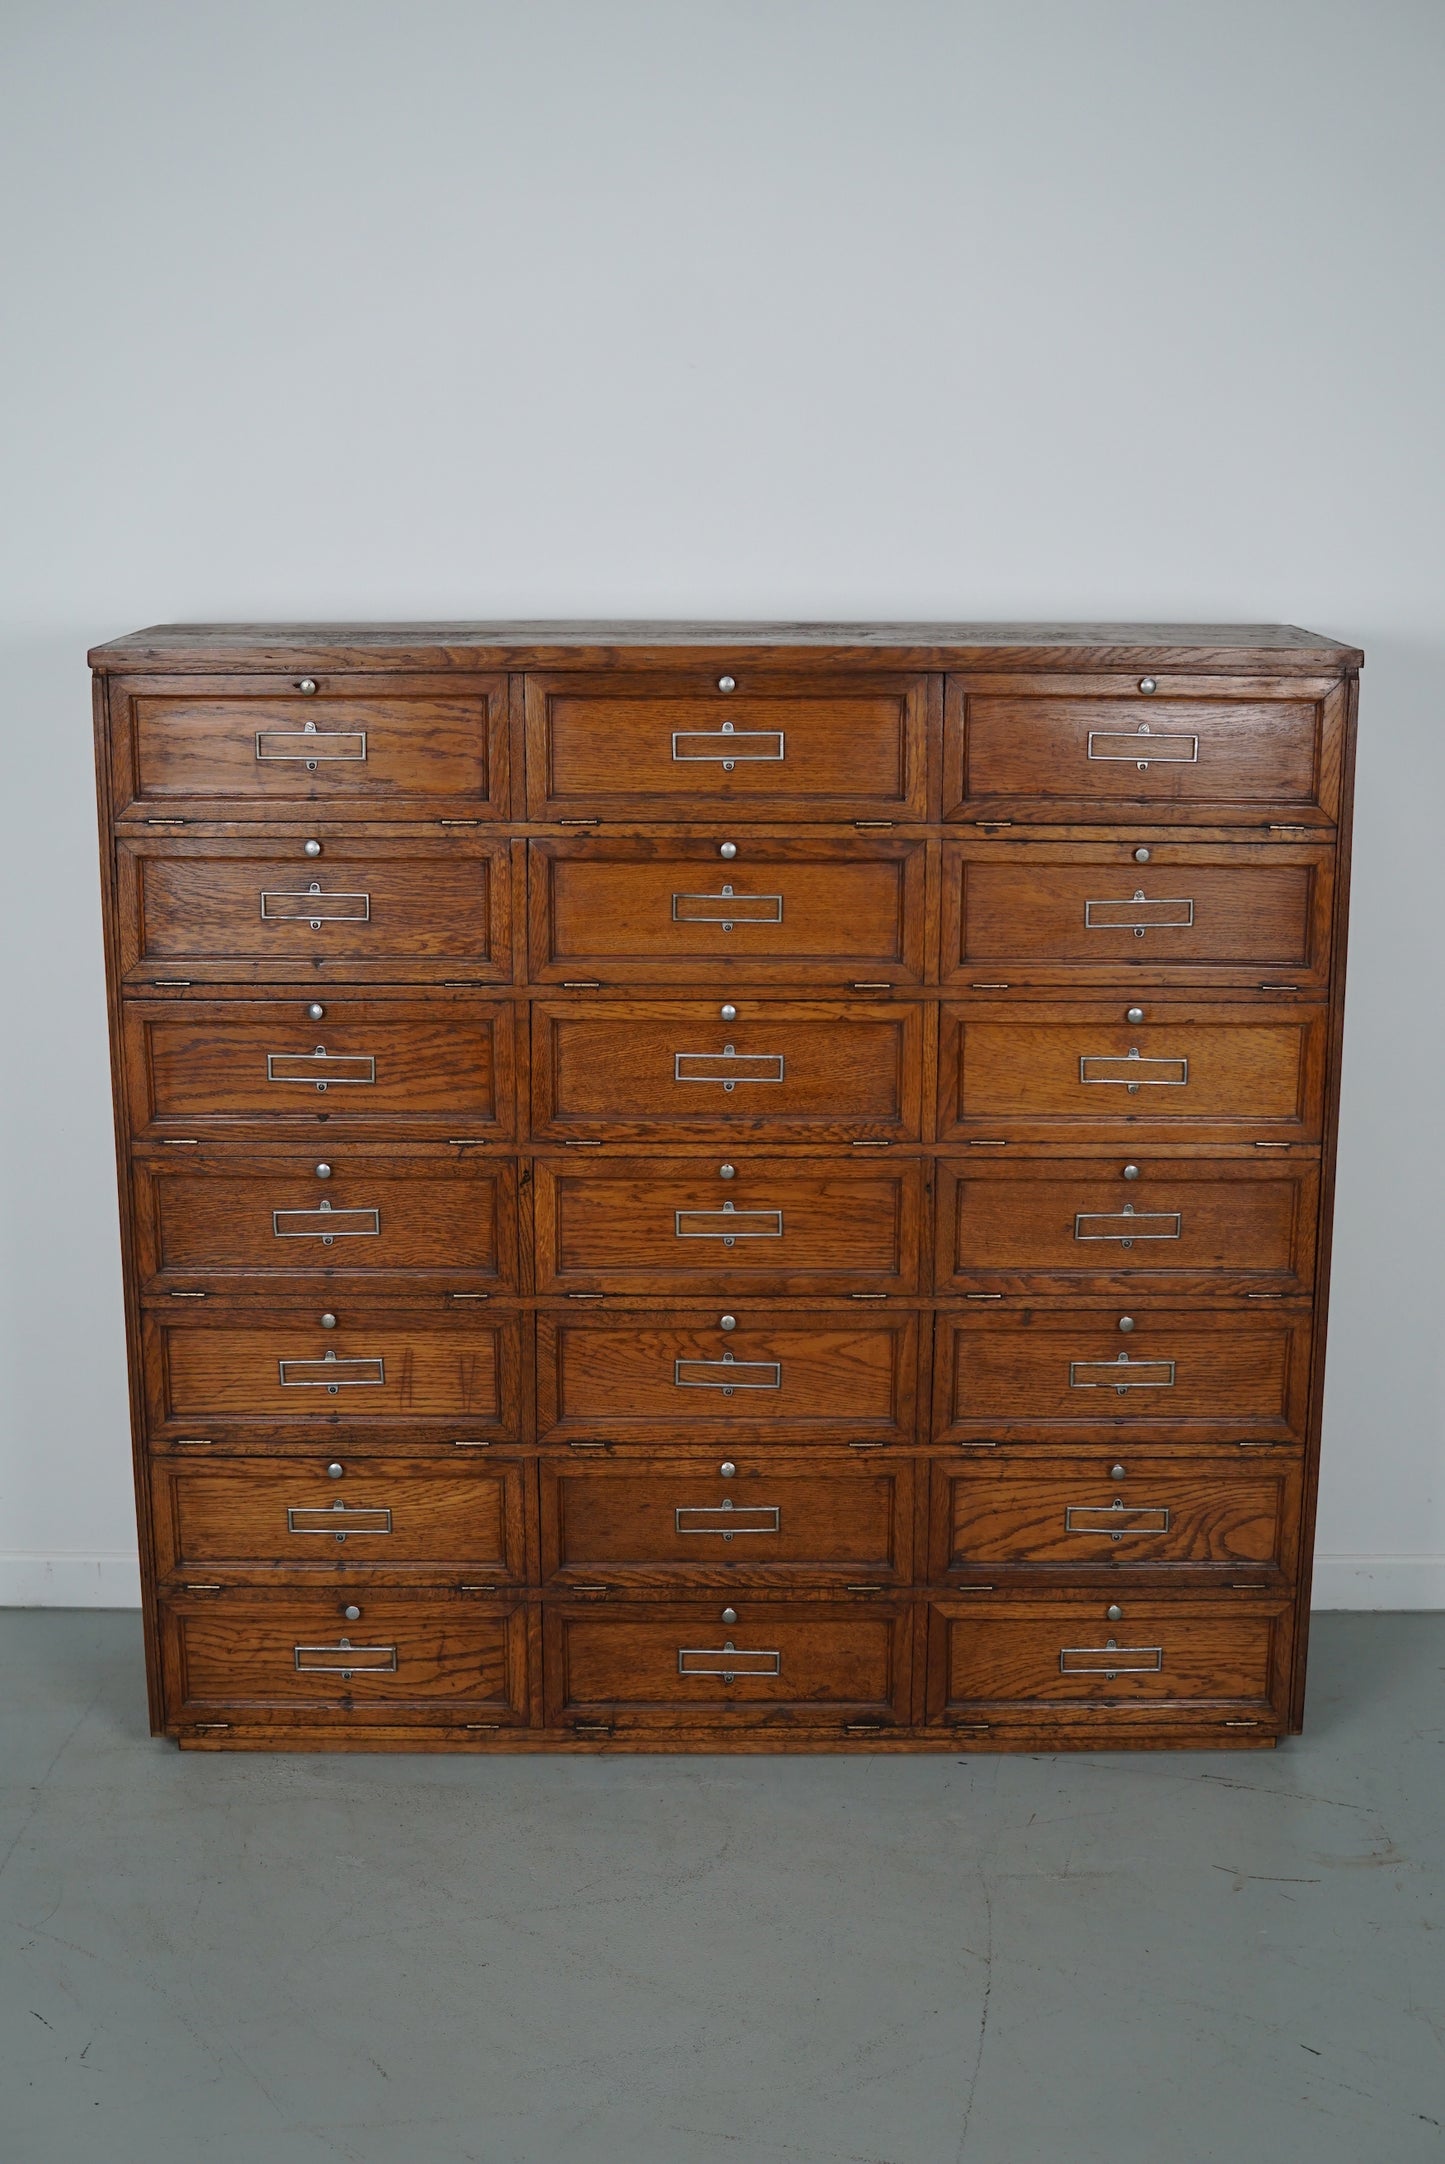 Antique French Oak Bank Cabinet with Drop Down Doors, ca 1920s